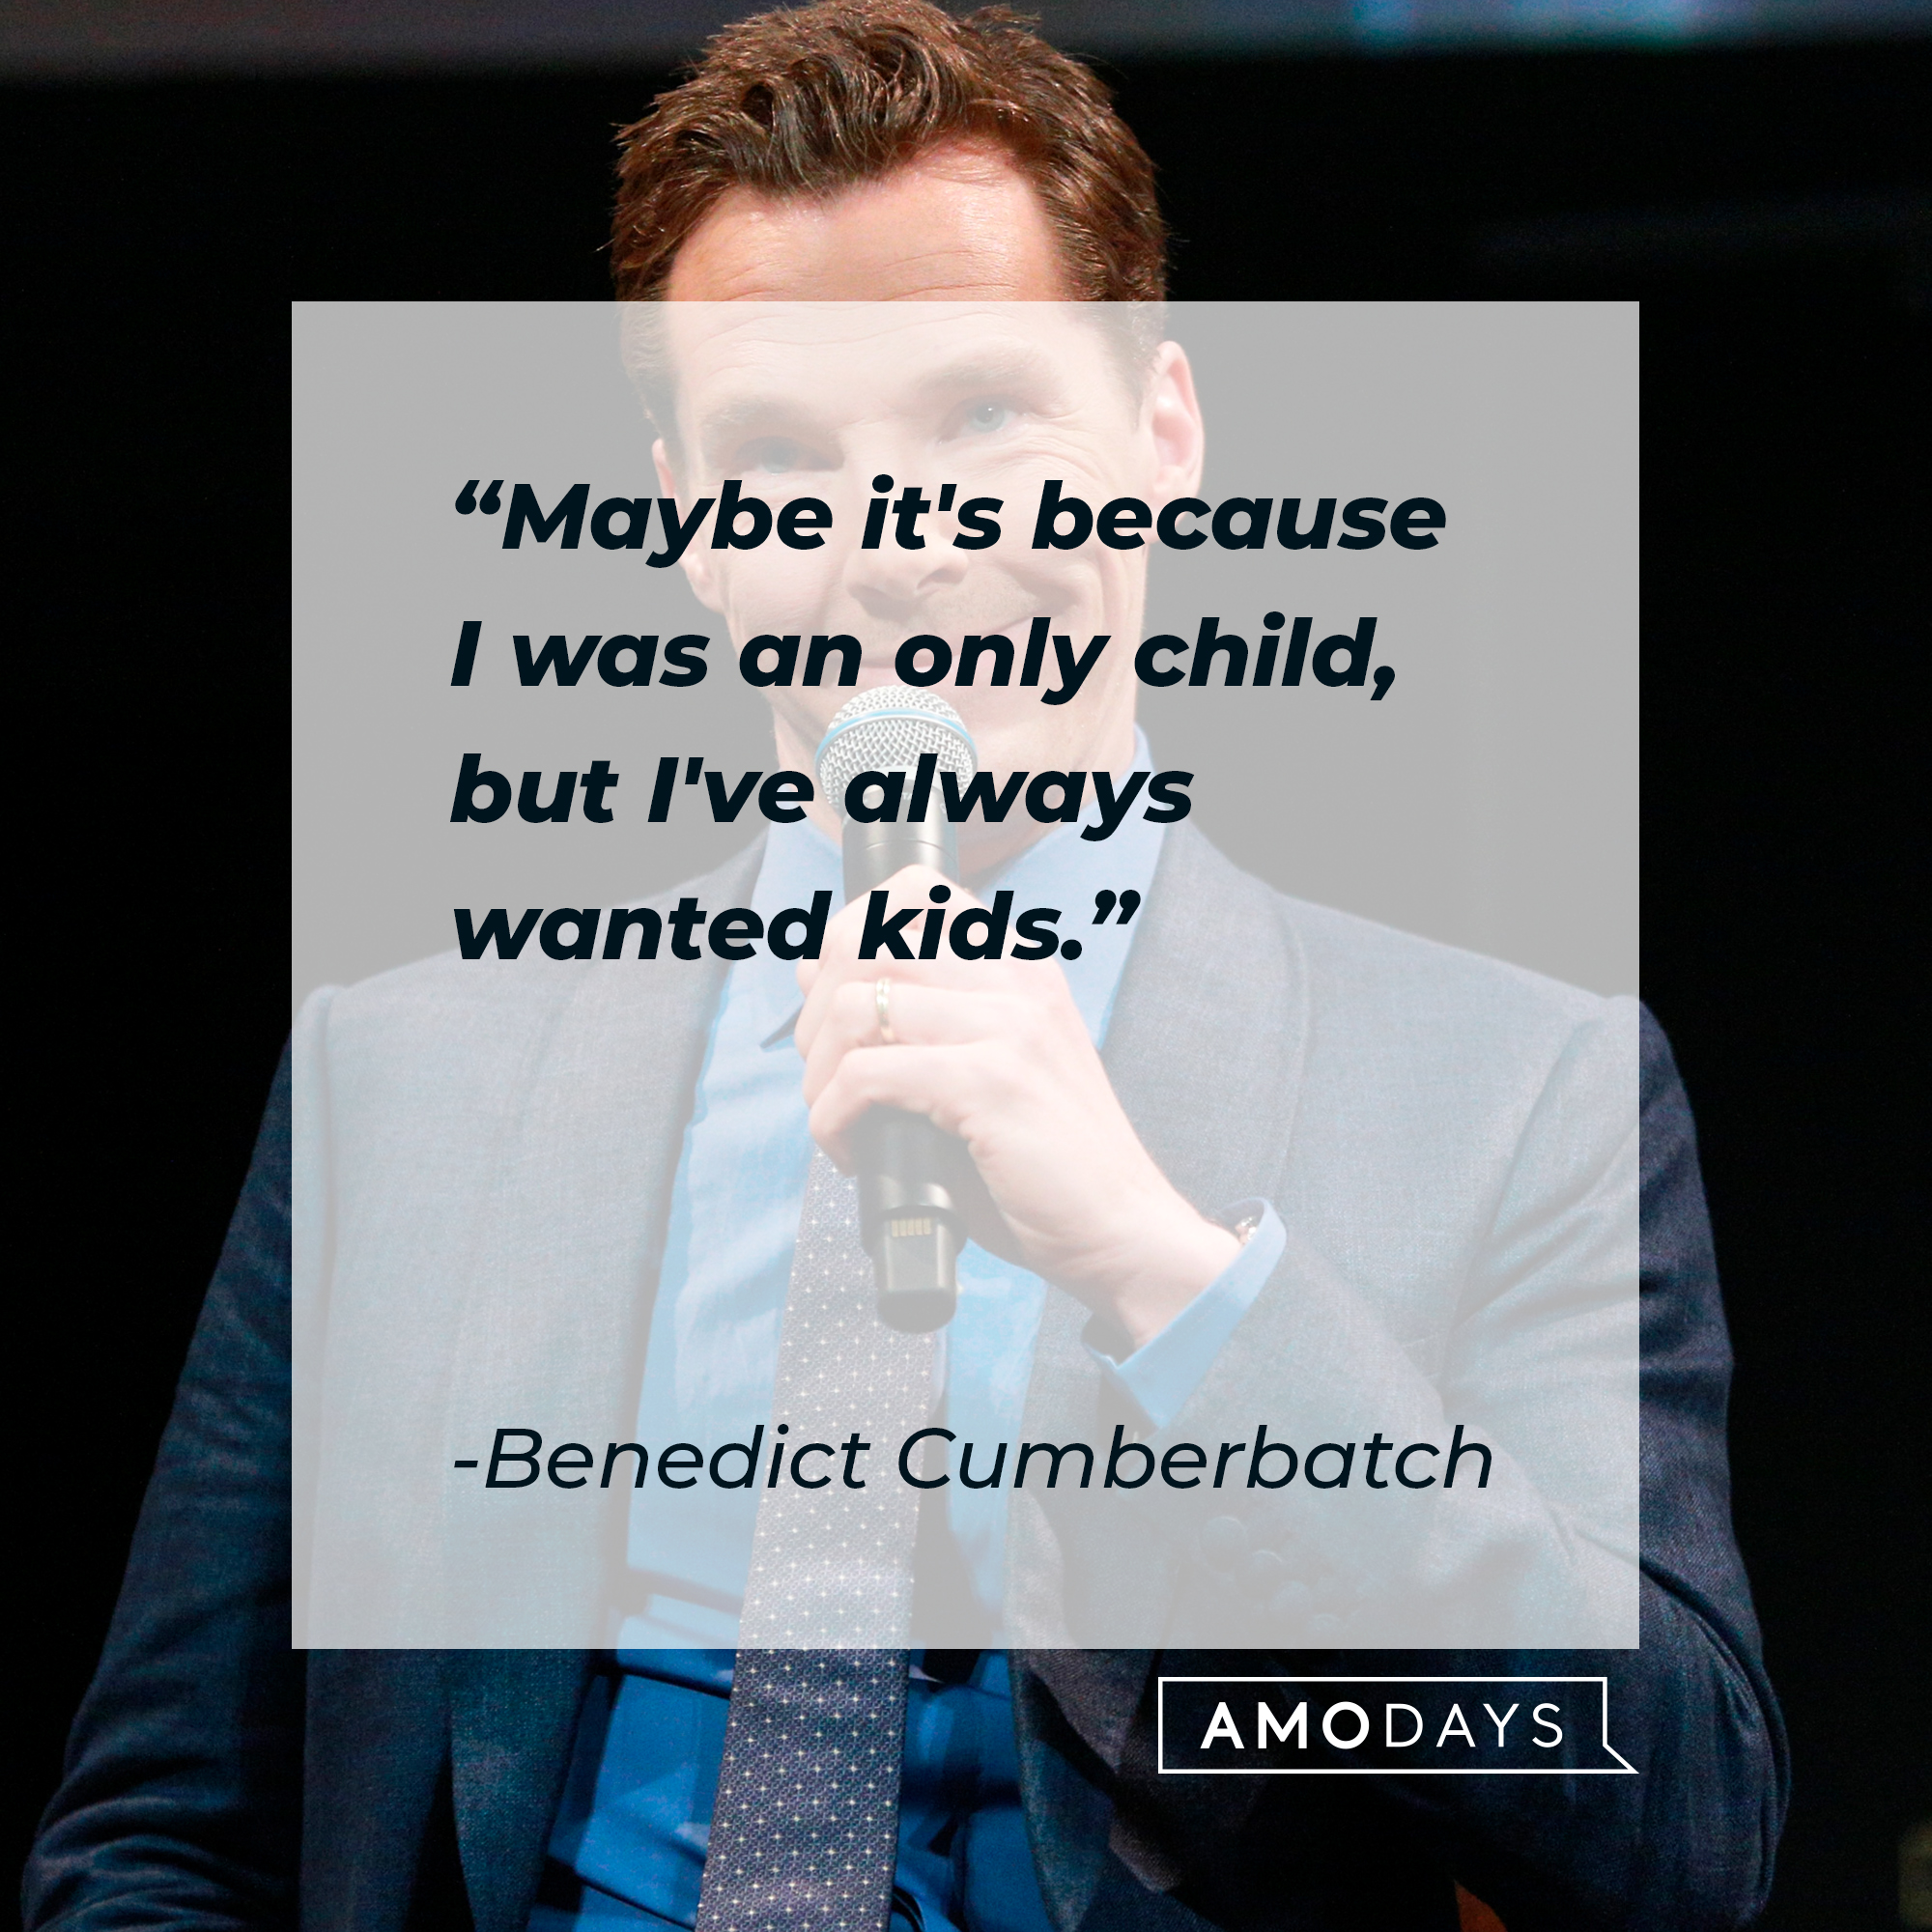 Benedict Cumberbatch, with his quote: “Maybe it's because I was an only child, but I've always wanted kids.”  | Source: Getty Images